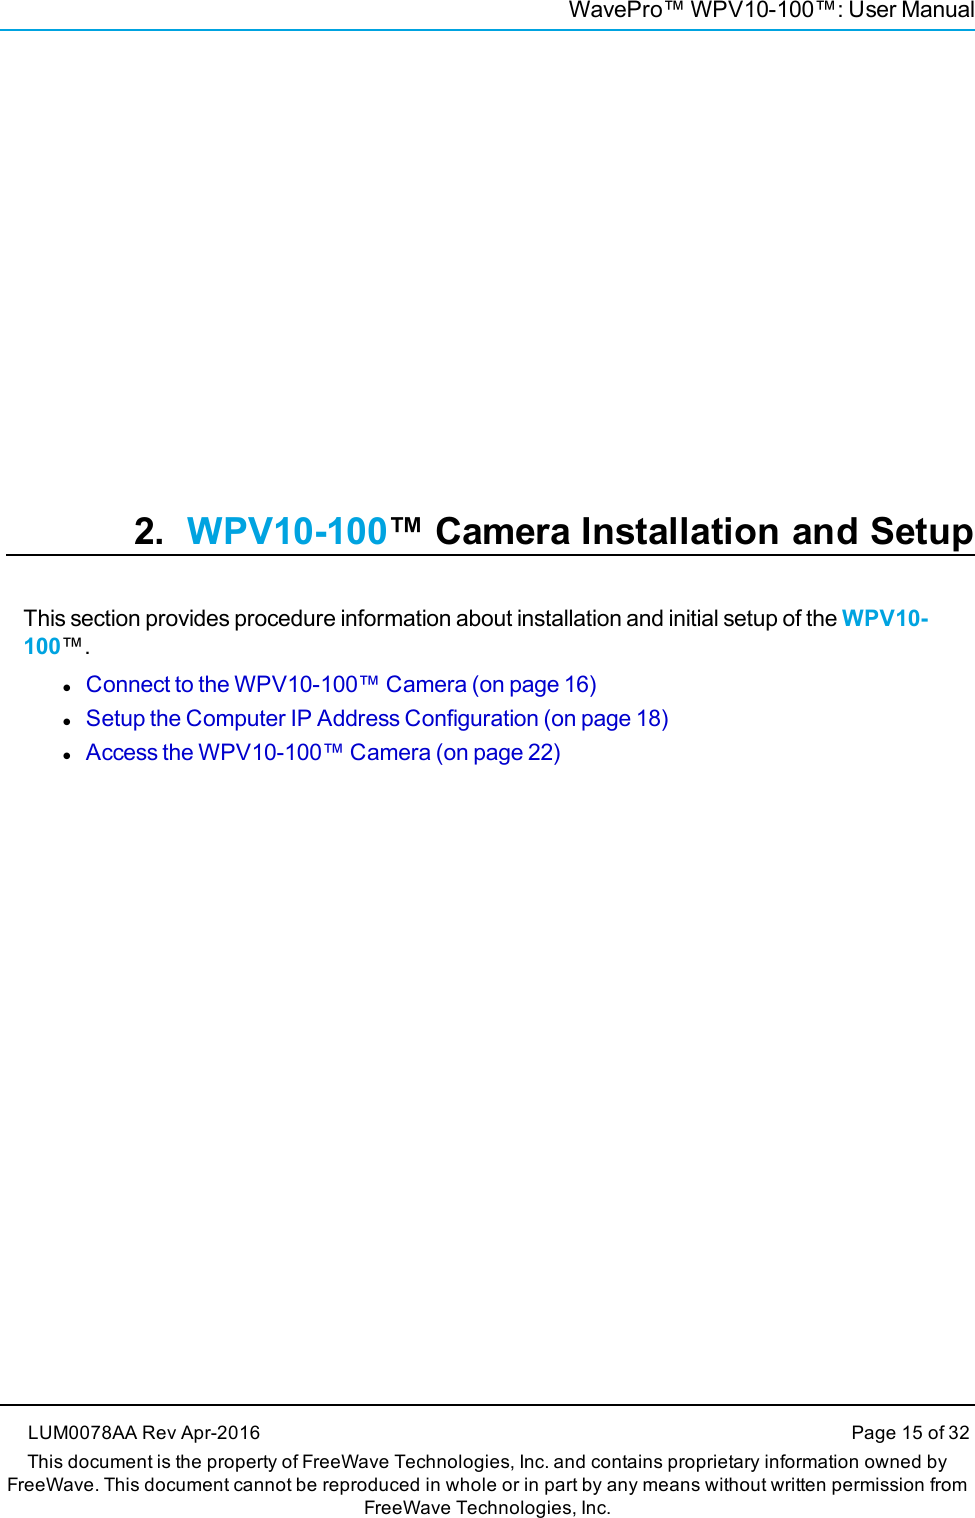 WavePro™ WPV10-100™: User Manual2. WPV10-100™ Camera Installation and SetupThis section provides procedure information about installation and initial setup of the WPV10-100™.lConnect to the WPV10-100™ Camera (on page 16)lSetup the Computer IP Address Configuration (on page 18)lAccess the WPV10-100™ Camera (on page 22)LUM0078AA Rev Apr-2016 Page 15 of 32This document is the property of FreeWave Technologies, Inc. and contains proprietary information owned byFreeWave. This document cannot be reproduced in whole or in part by any means without written permission fromFreeWave Technologies, Inc.